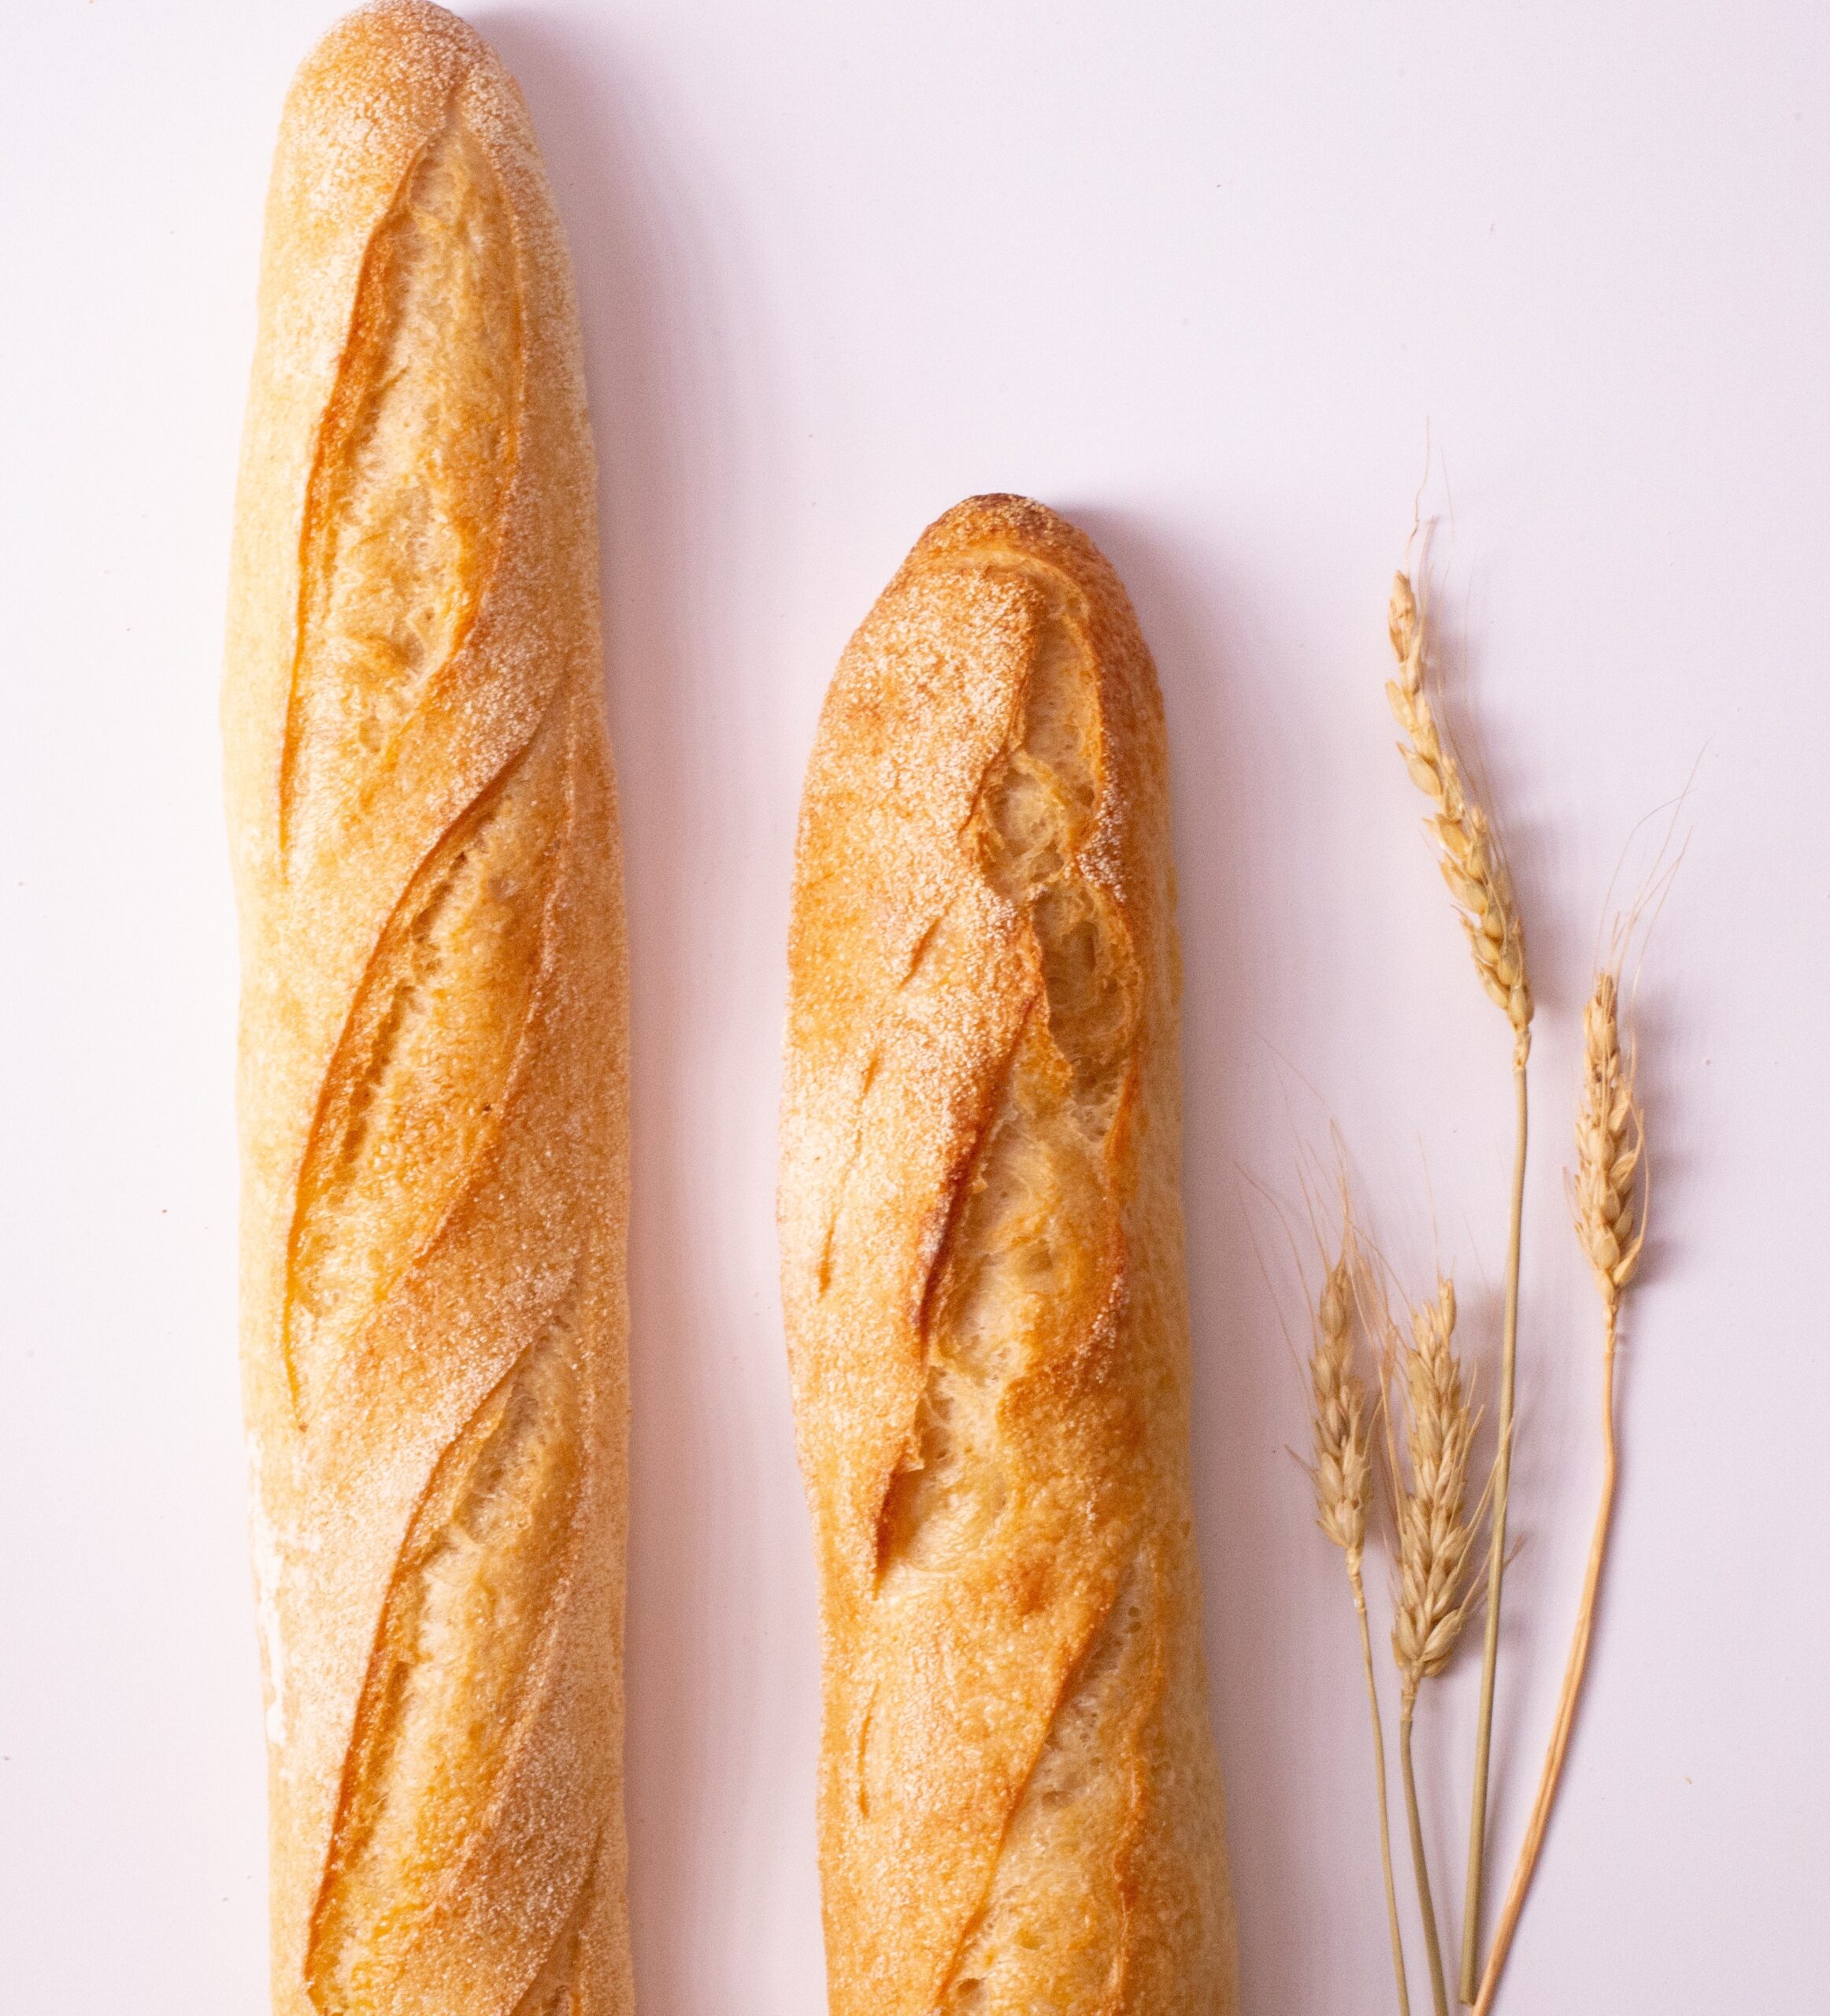 Two thin loaves of baguettes on a white background, with a wheat stalk to their right